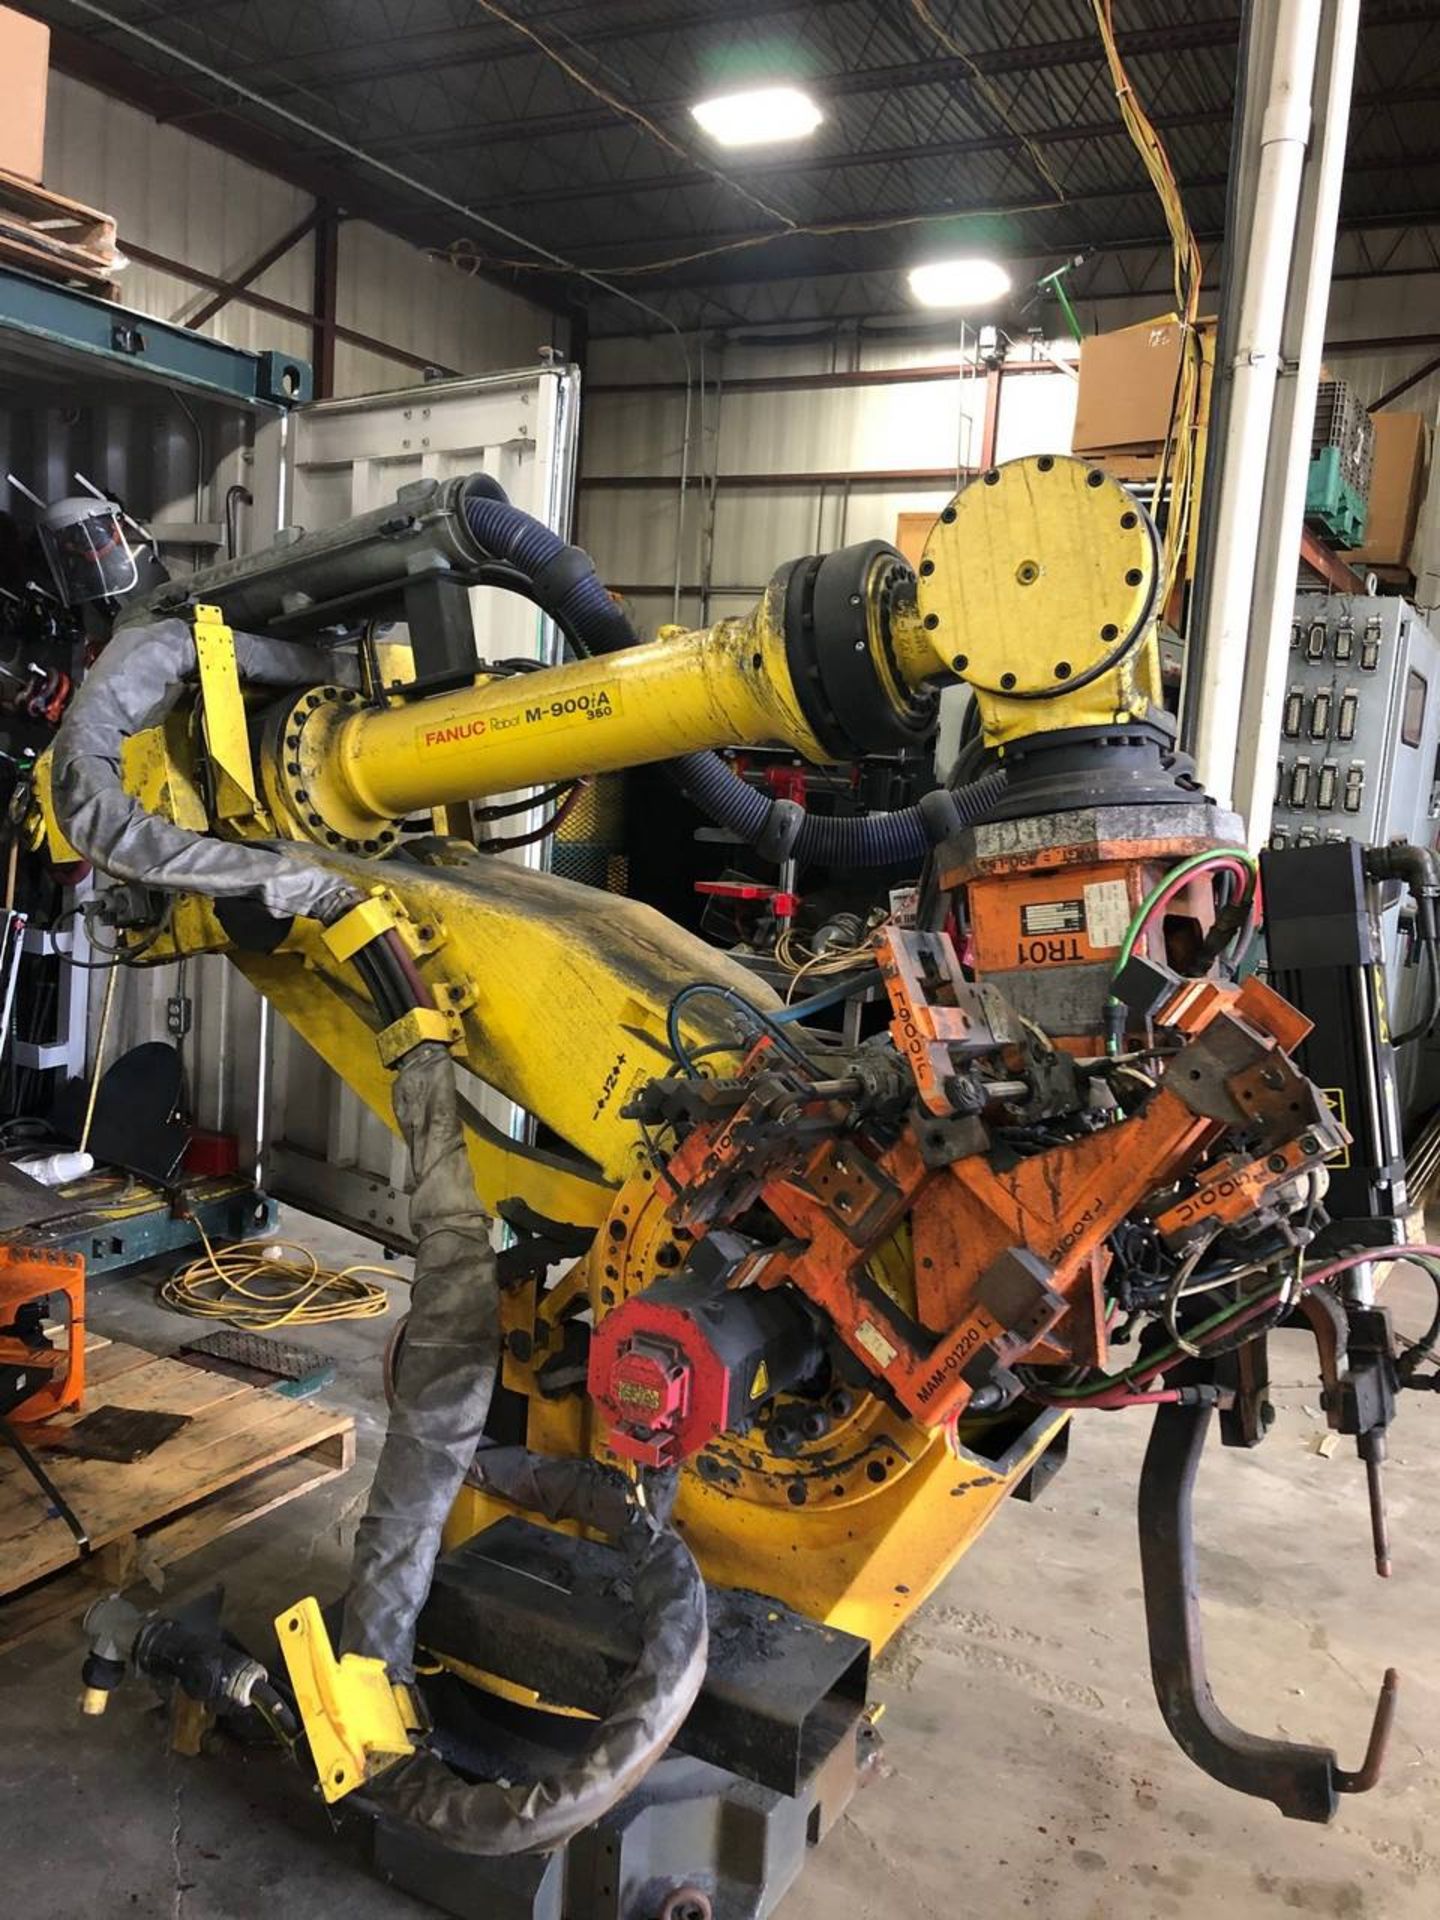 Fanuc M900ia-350 Robot with weld controller and servo gun - Image 4 of 6